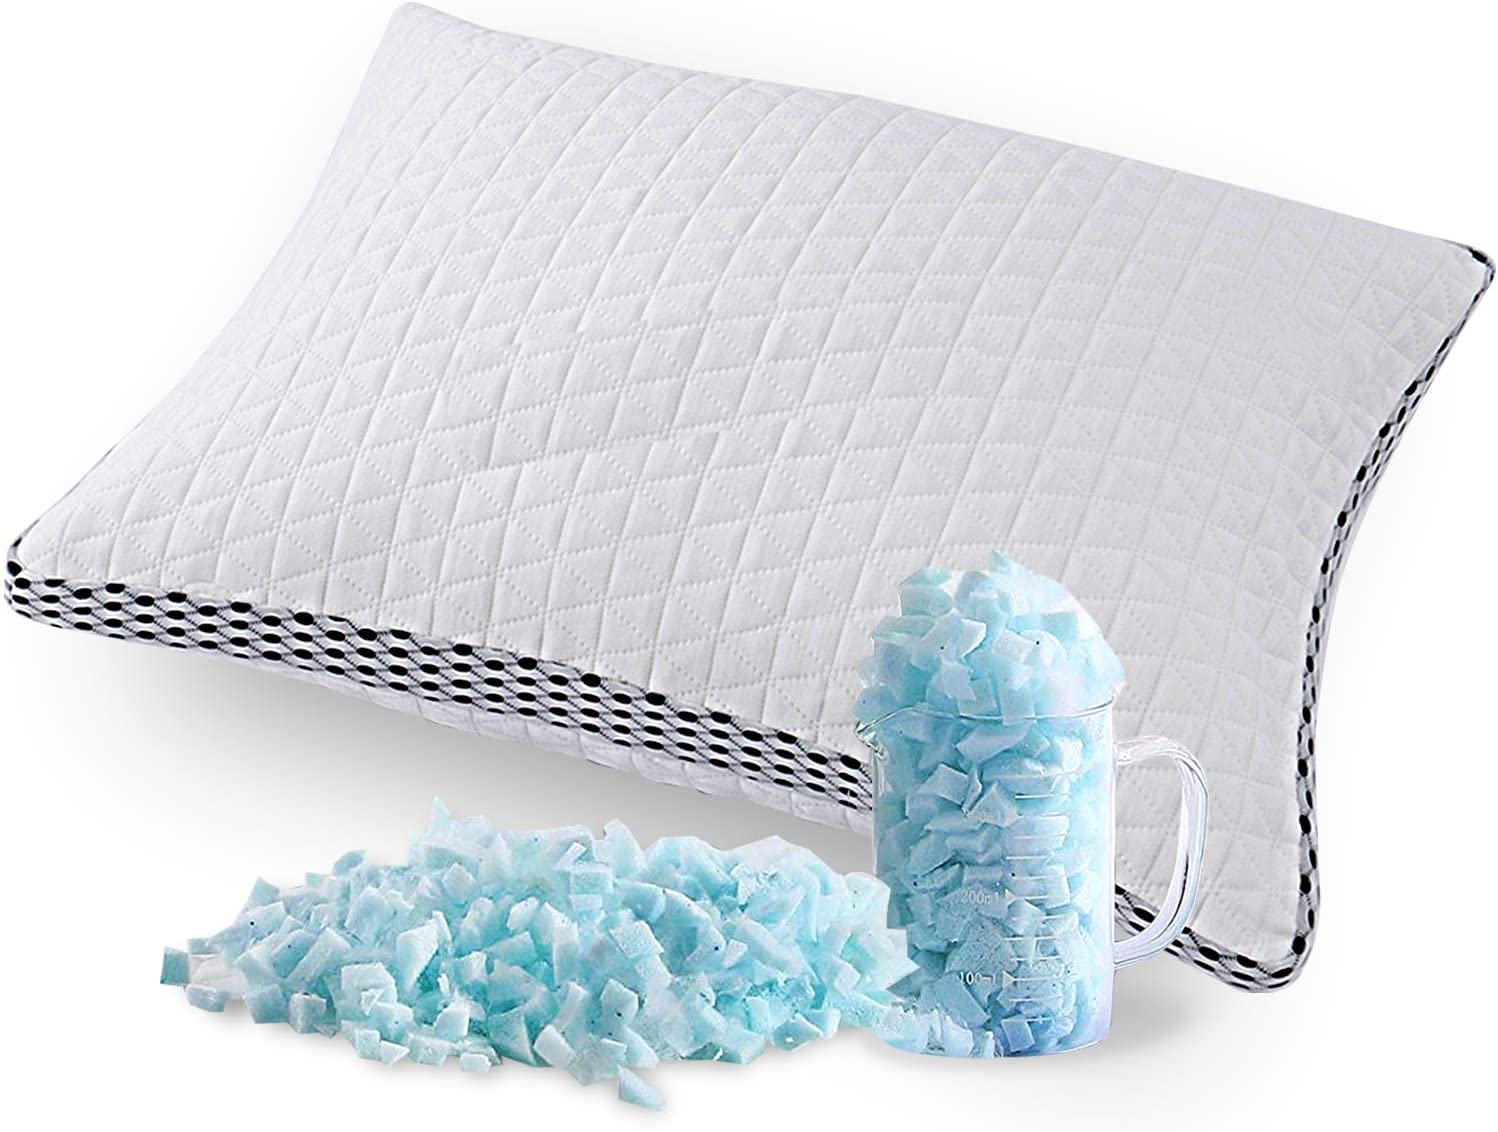 What is so special about bamboo cooling pillows?